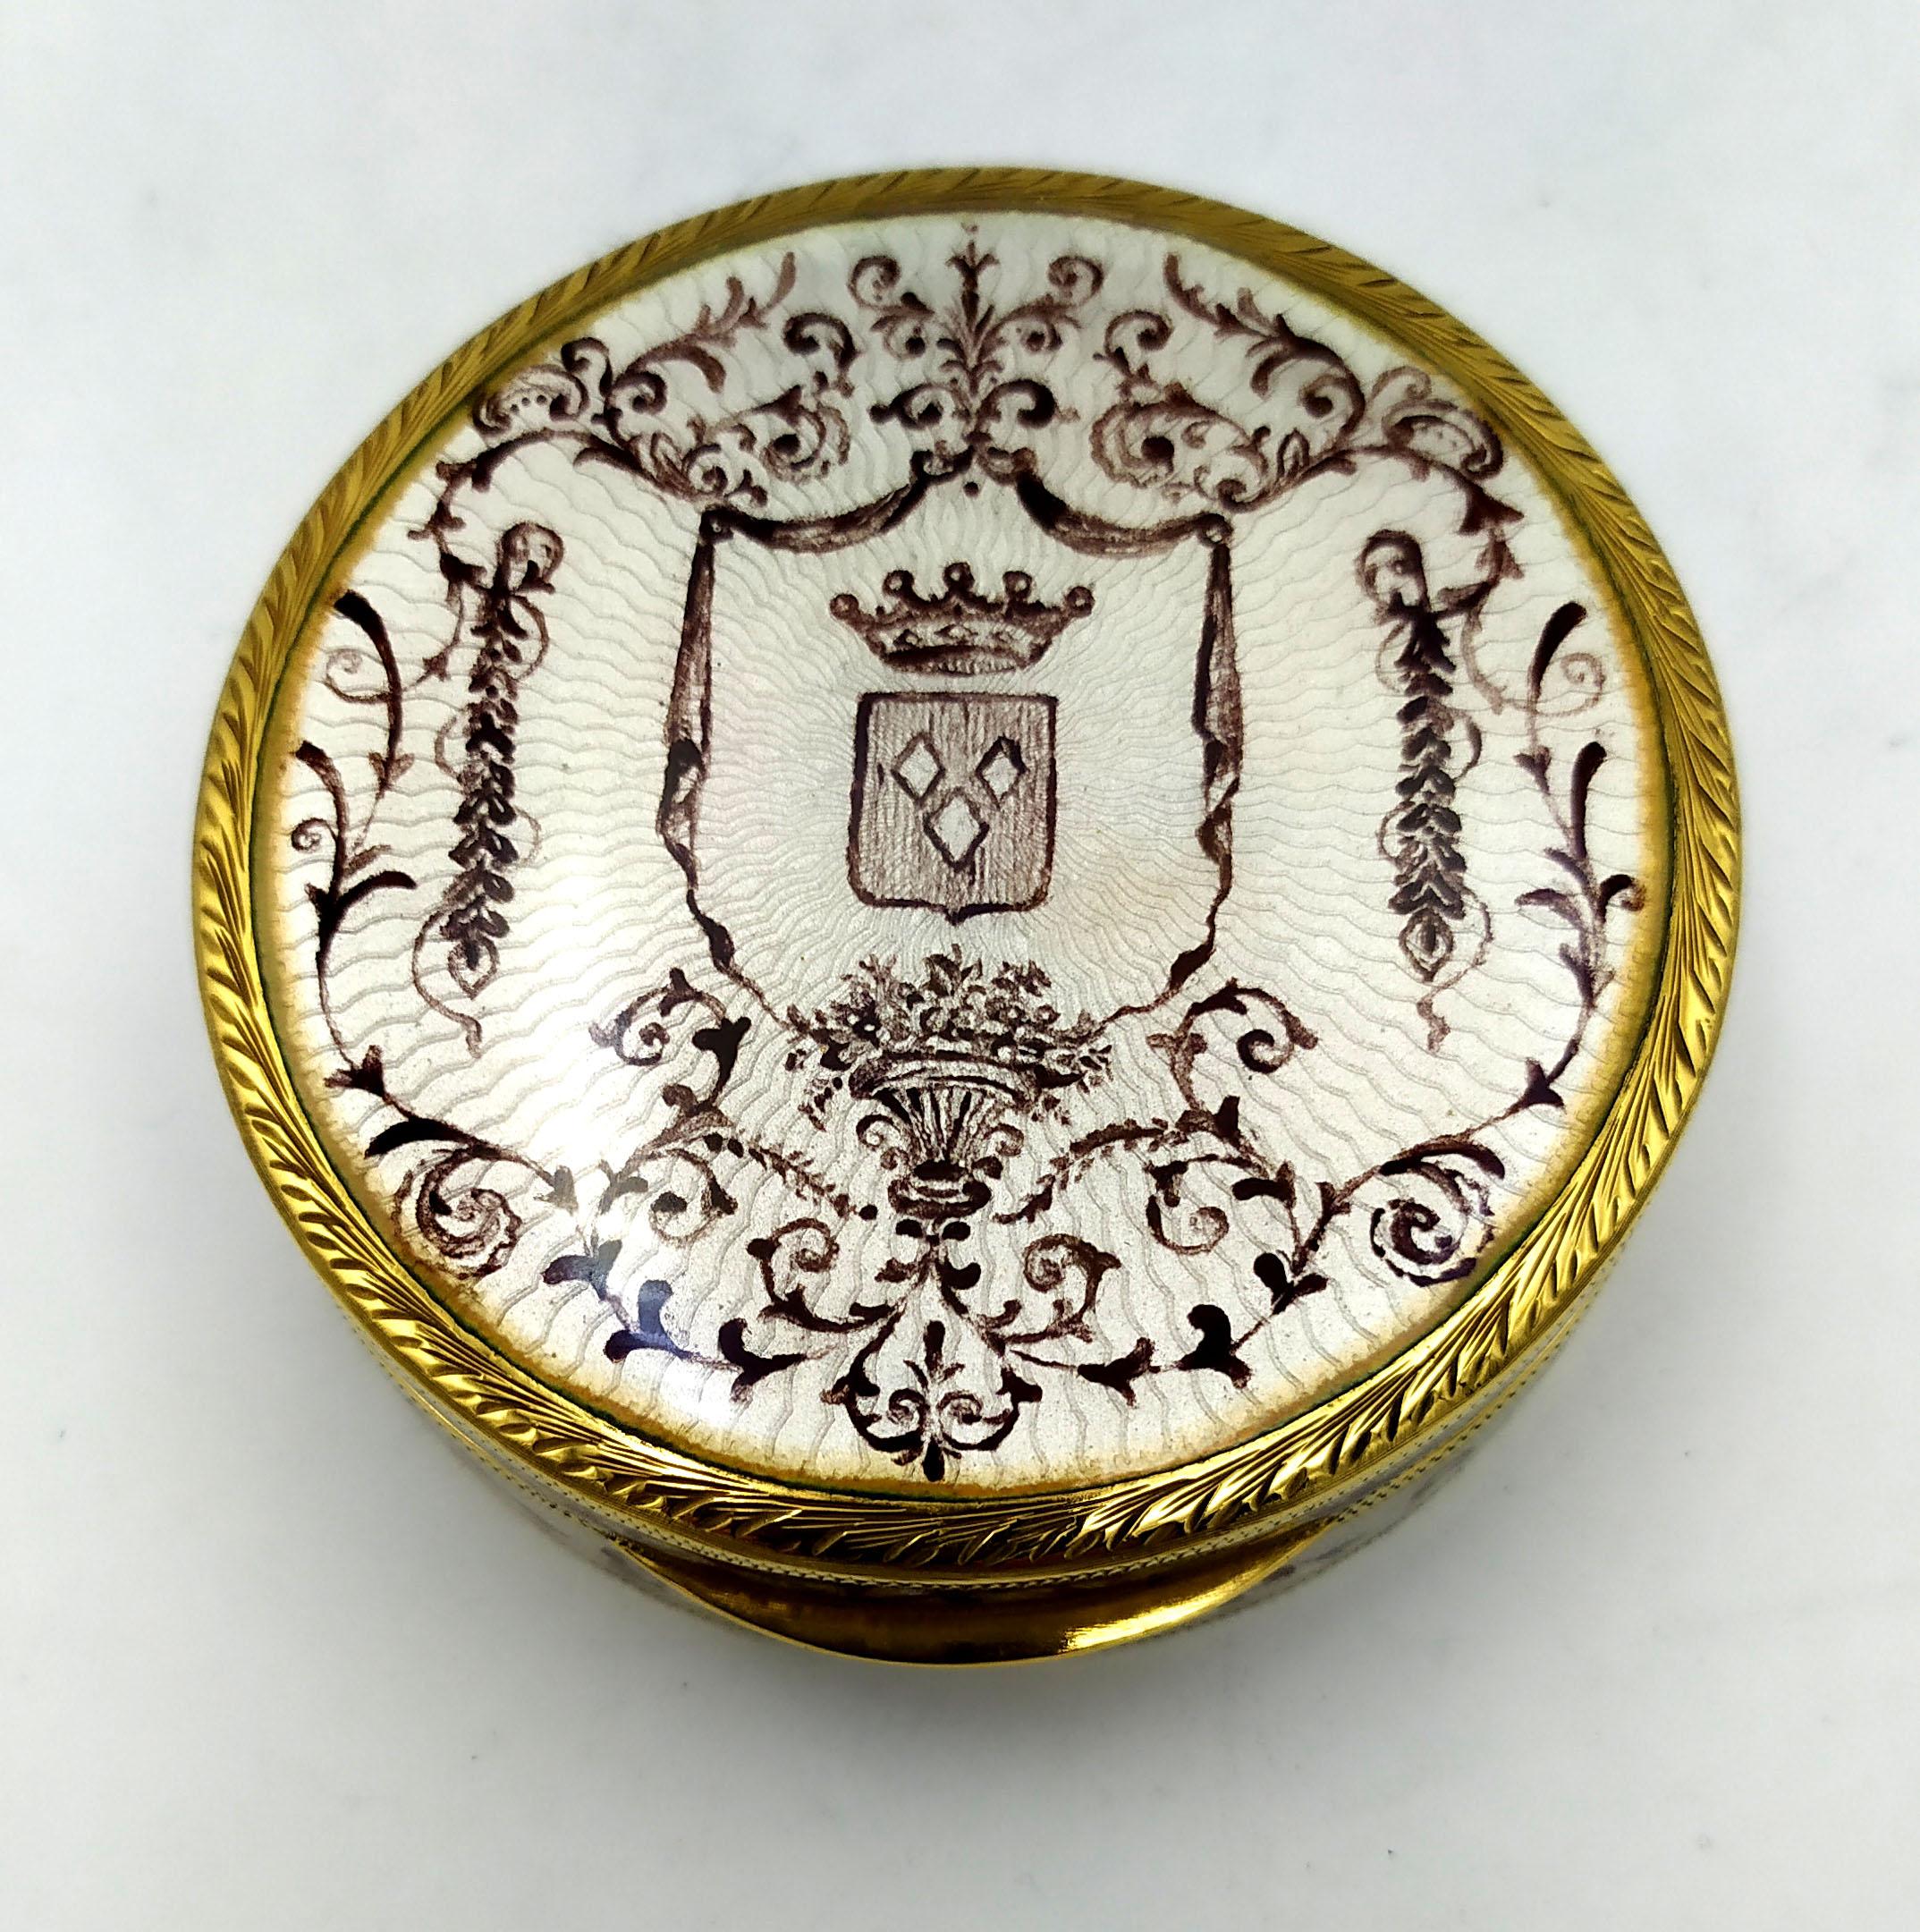 Snuff Box noble coat of arms is in 925/1000 sterling silver.
Snuff Box noble coat of arms has White fired enamels on guilloché and handpainted miniature of arabesques with noble coat of arms by the painter Renato Dainelli.
Snuff Box noble coat of